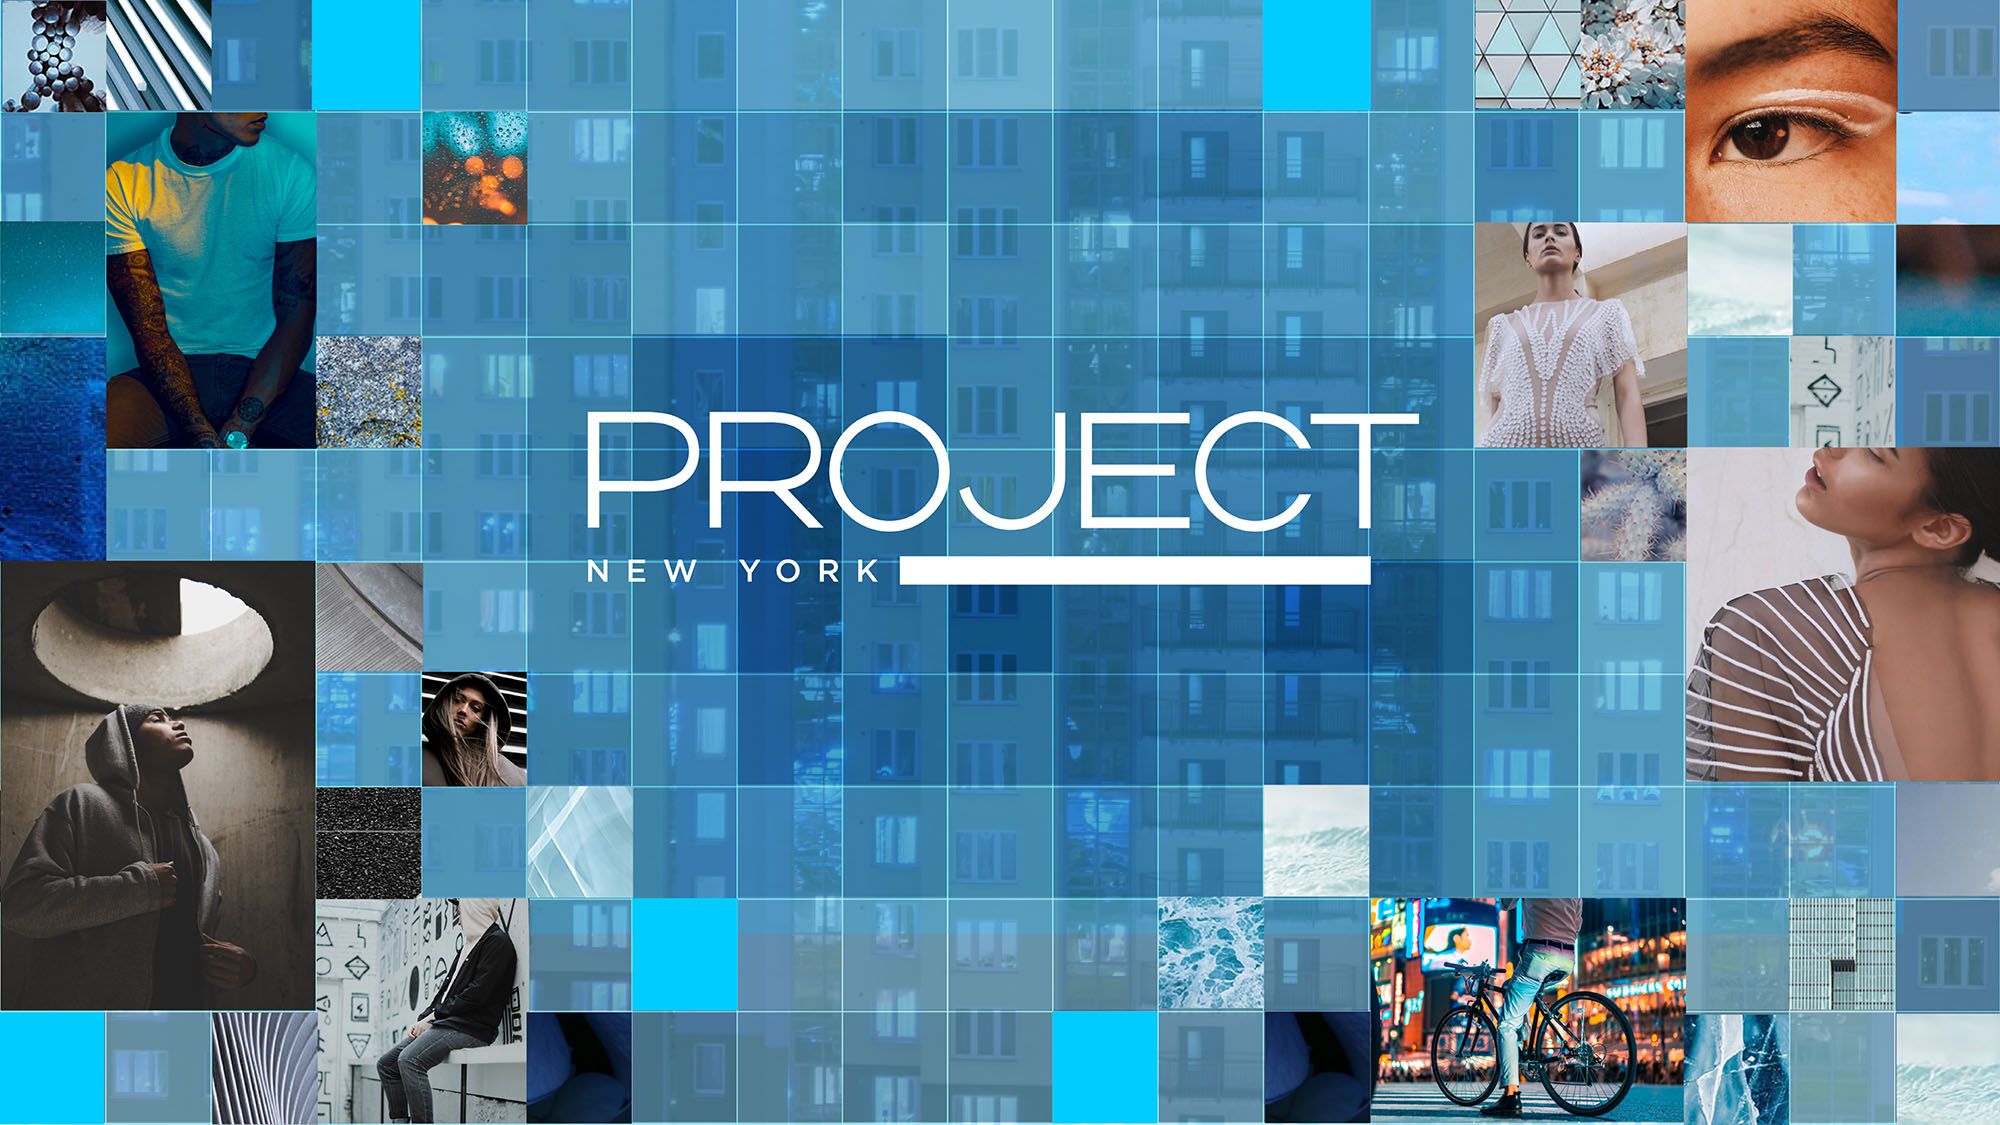 PROJECT NEW YORK CAMPAIGN ART 2